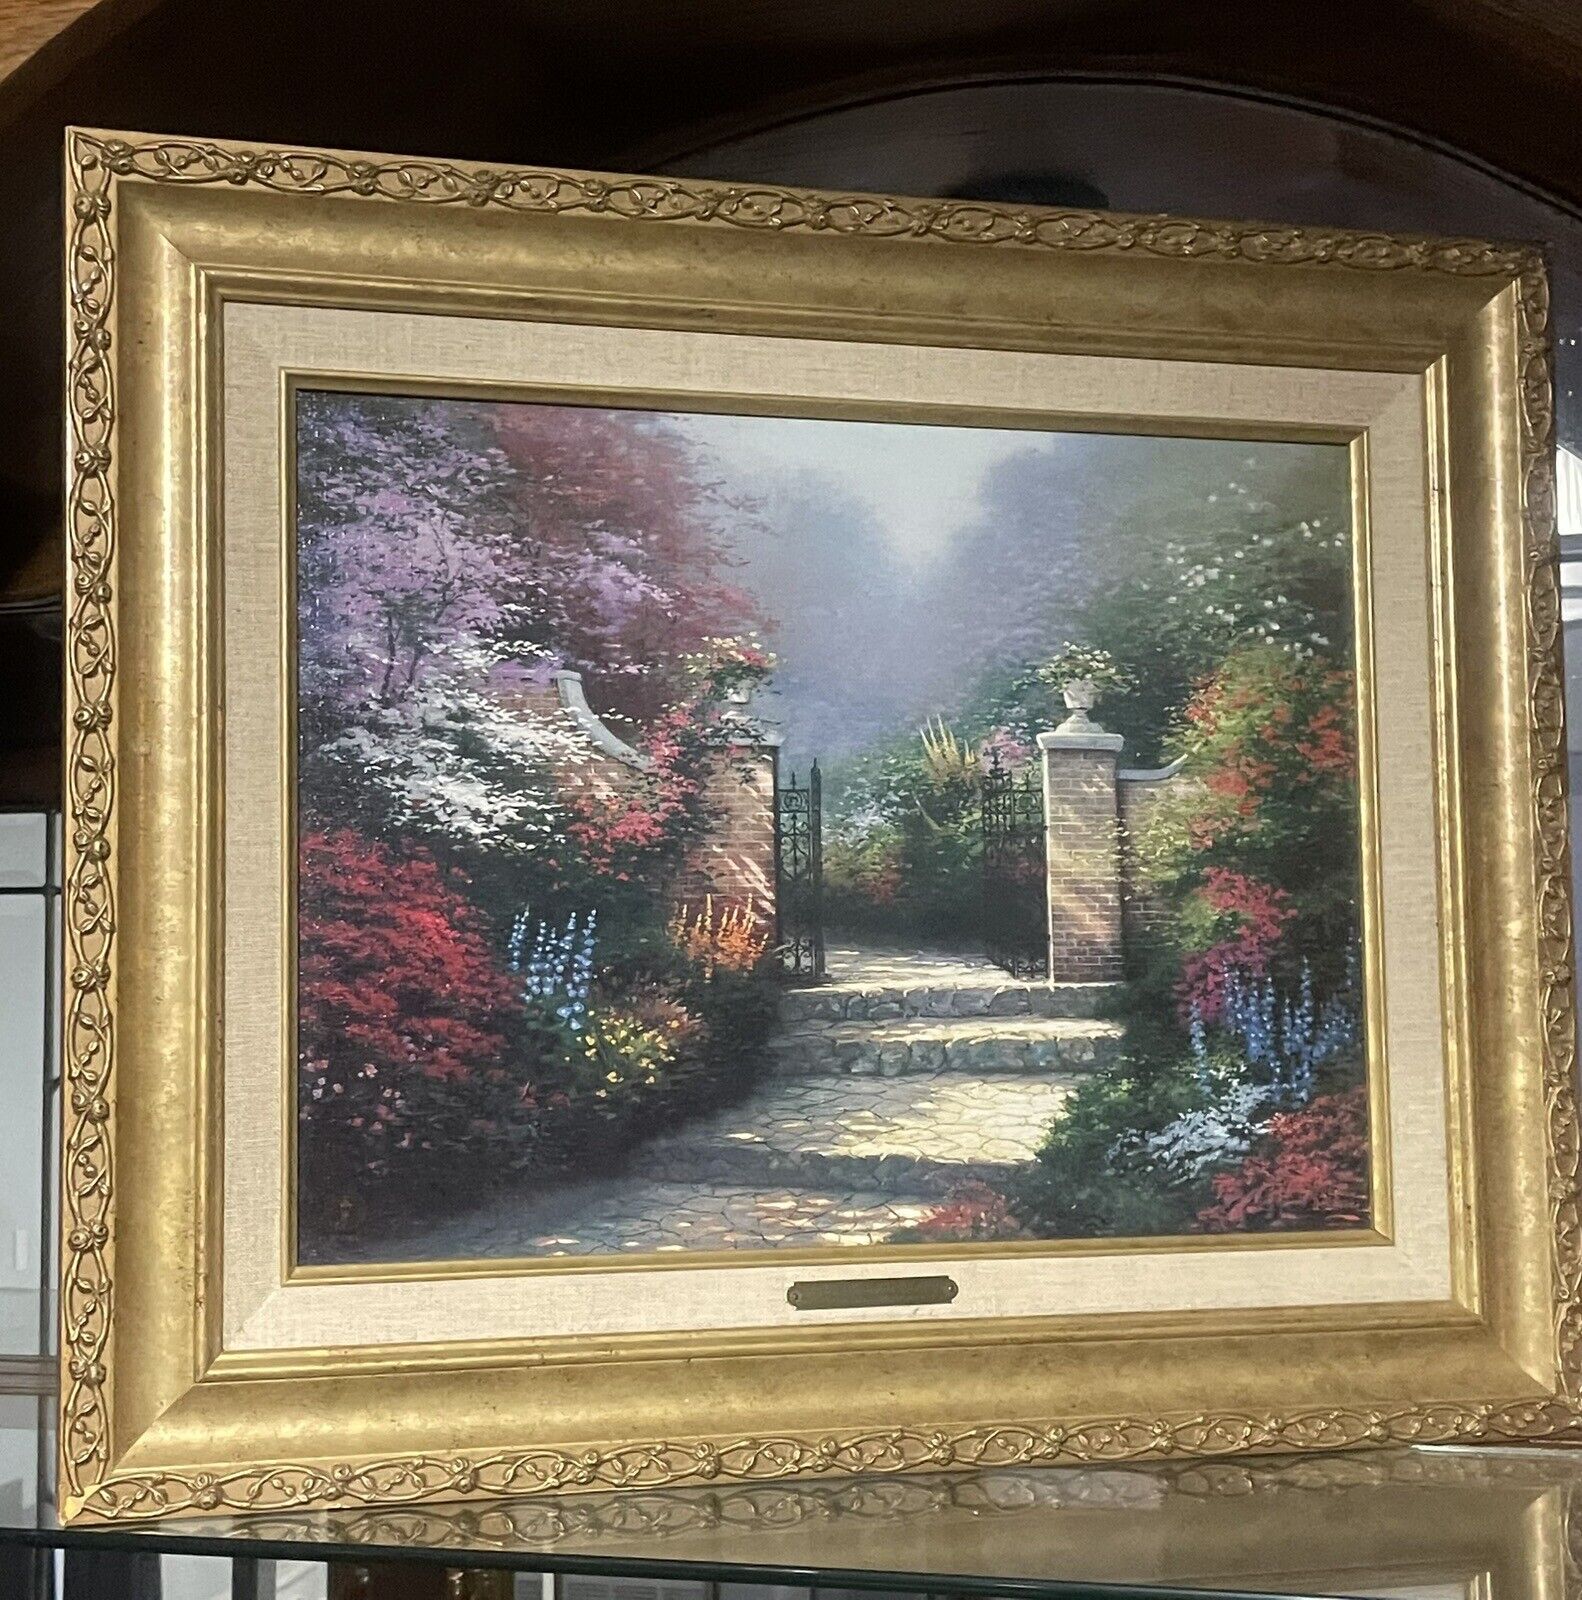 Original paintings by THOMAS KINKADE, it has its certification of authenticity.